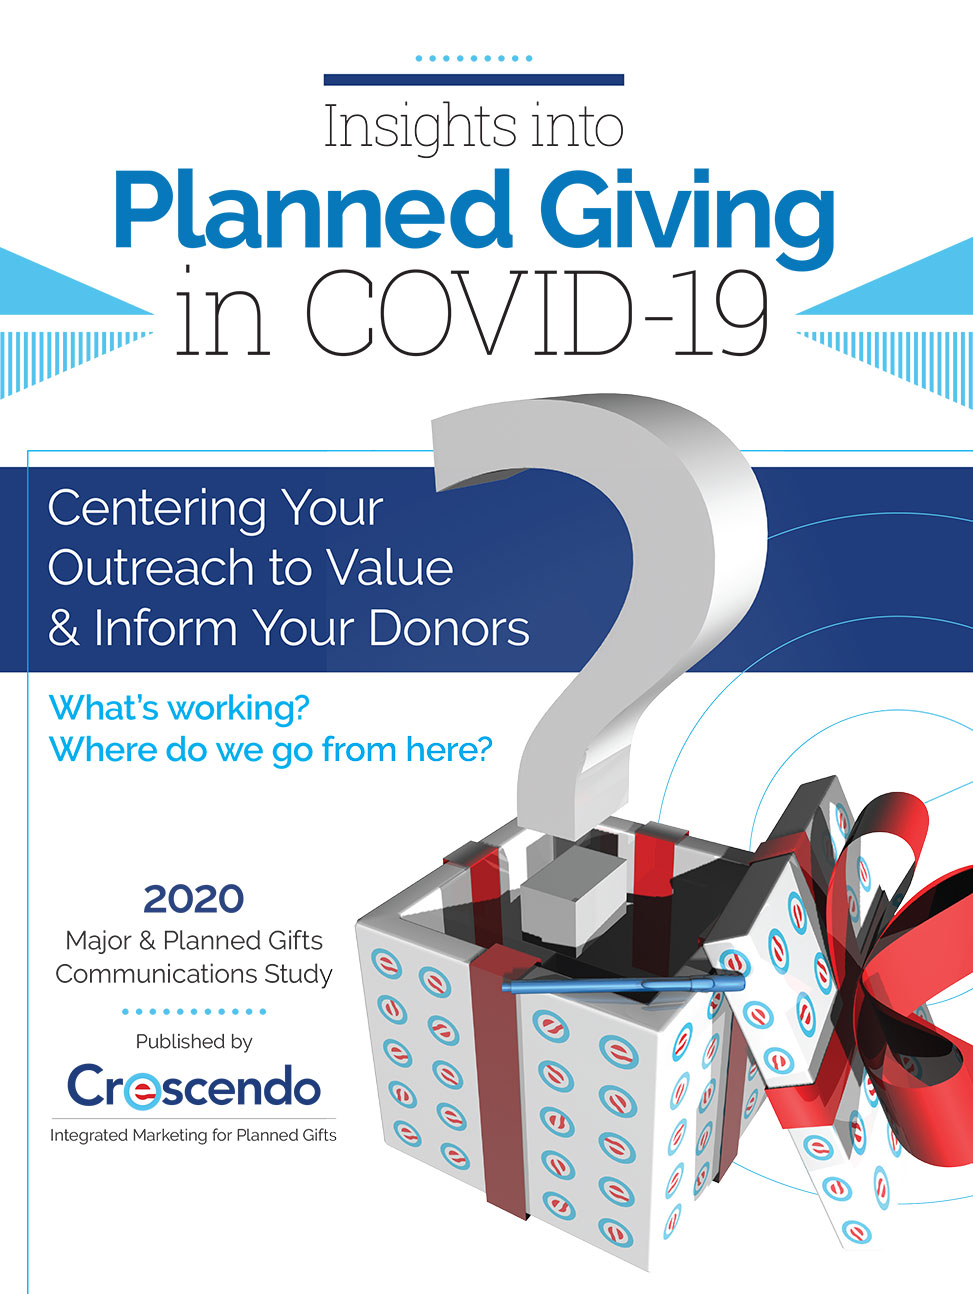 Insights into Planned Giving in COVID-19